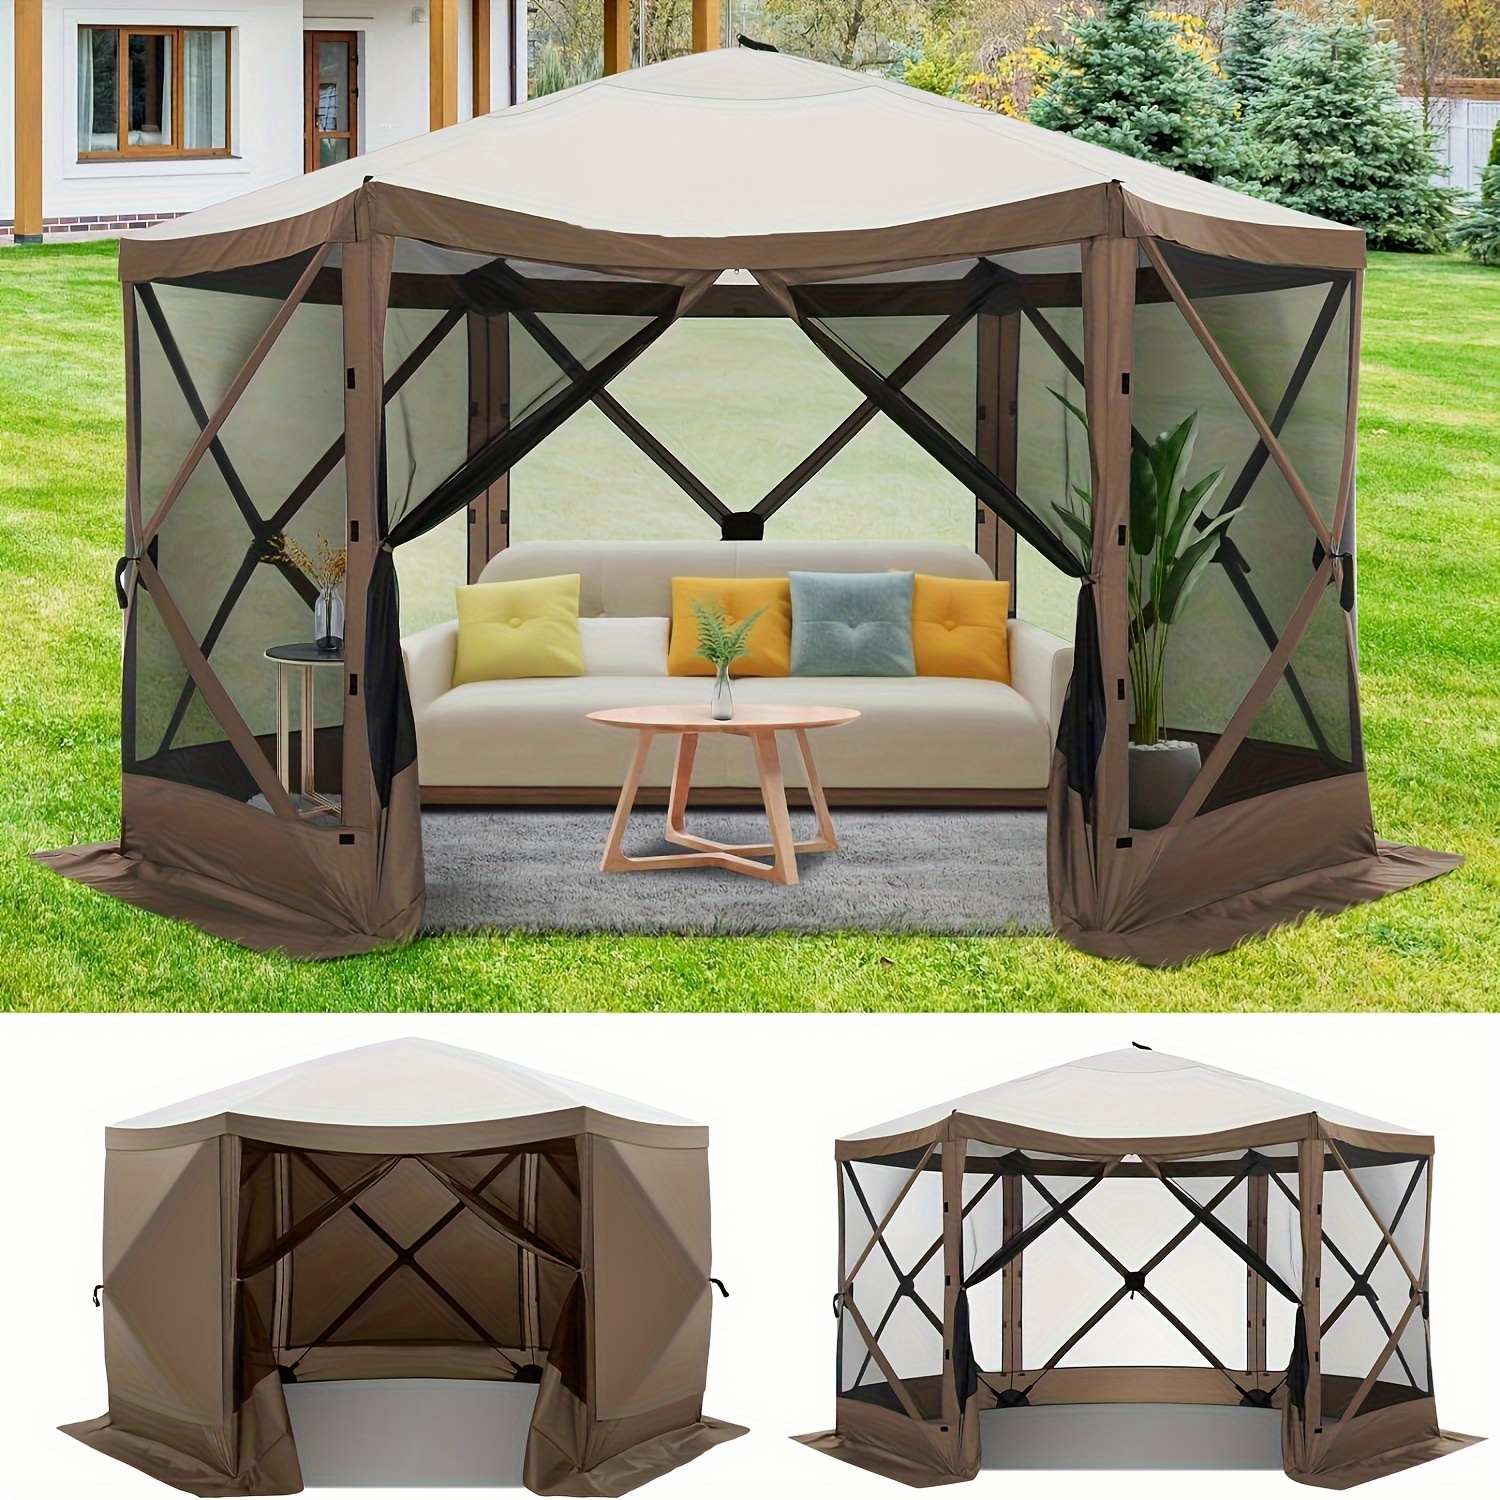 

Cobizi 12x12ft Pop Up Gazebo Screen House Tent With Sidewalls For Camping, 6 Sides Pop-up Canopy Shelter Tent Easy-set Portable Gazebo With Carry Bag For Outdoor Parties, Lawn And Backyard